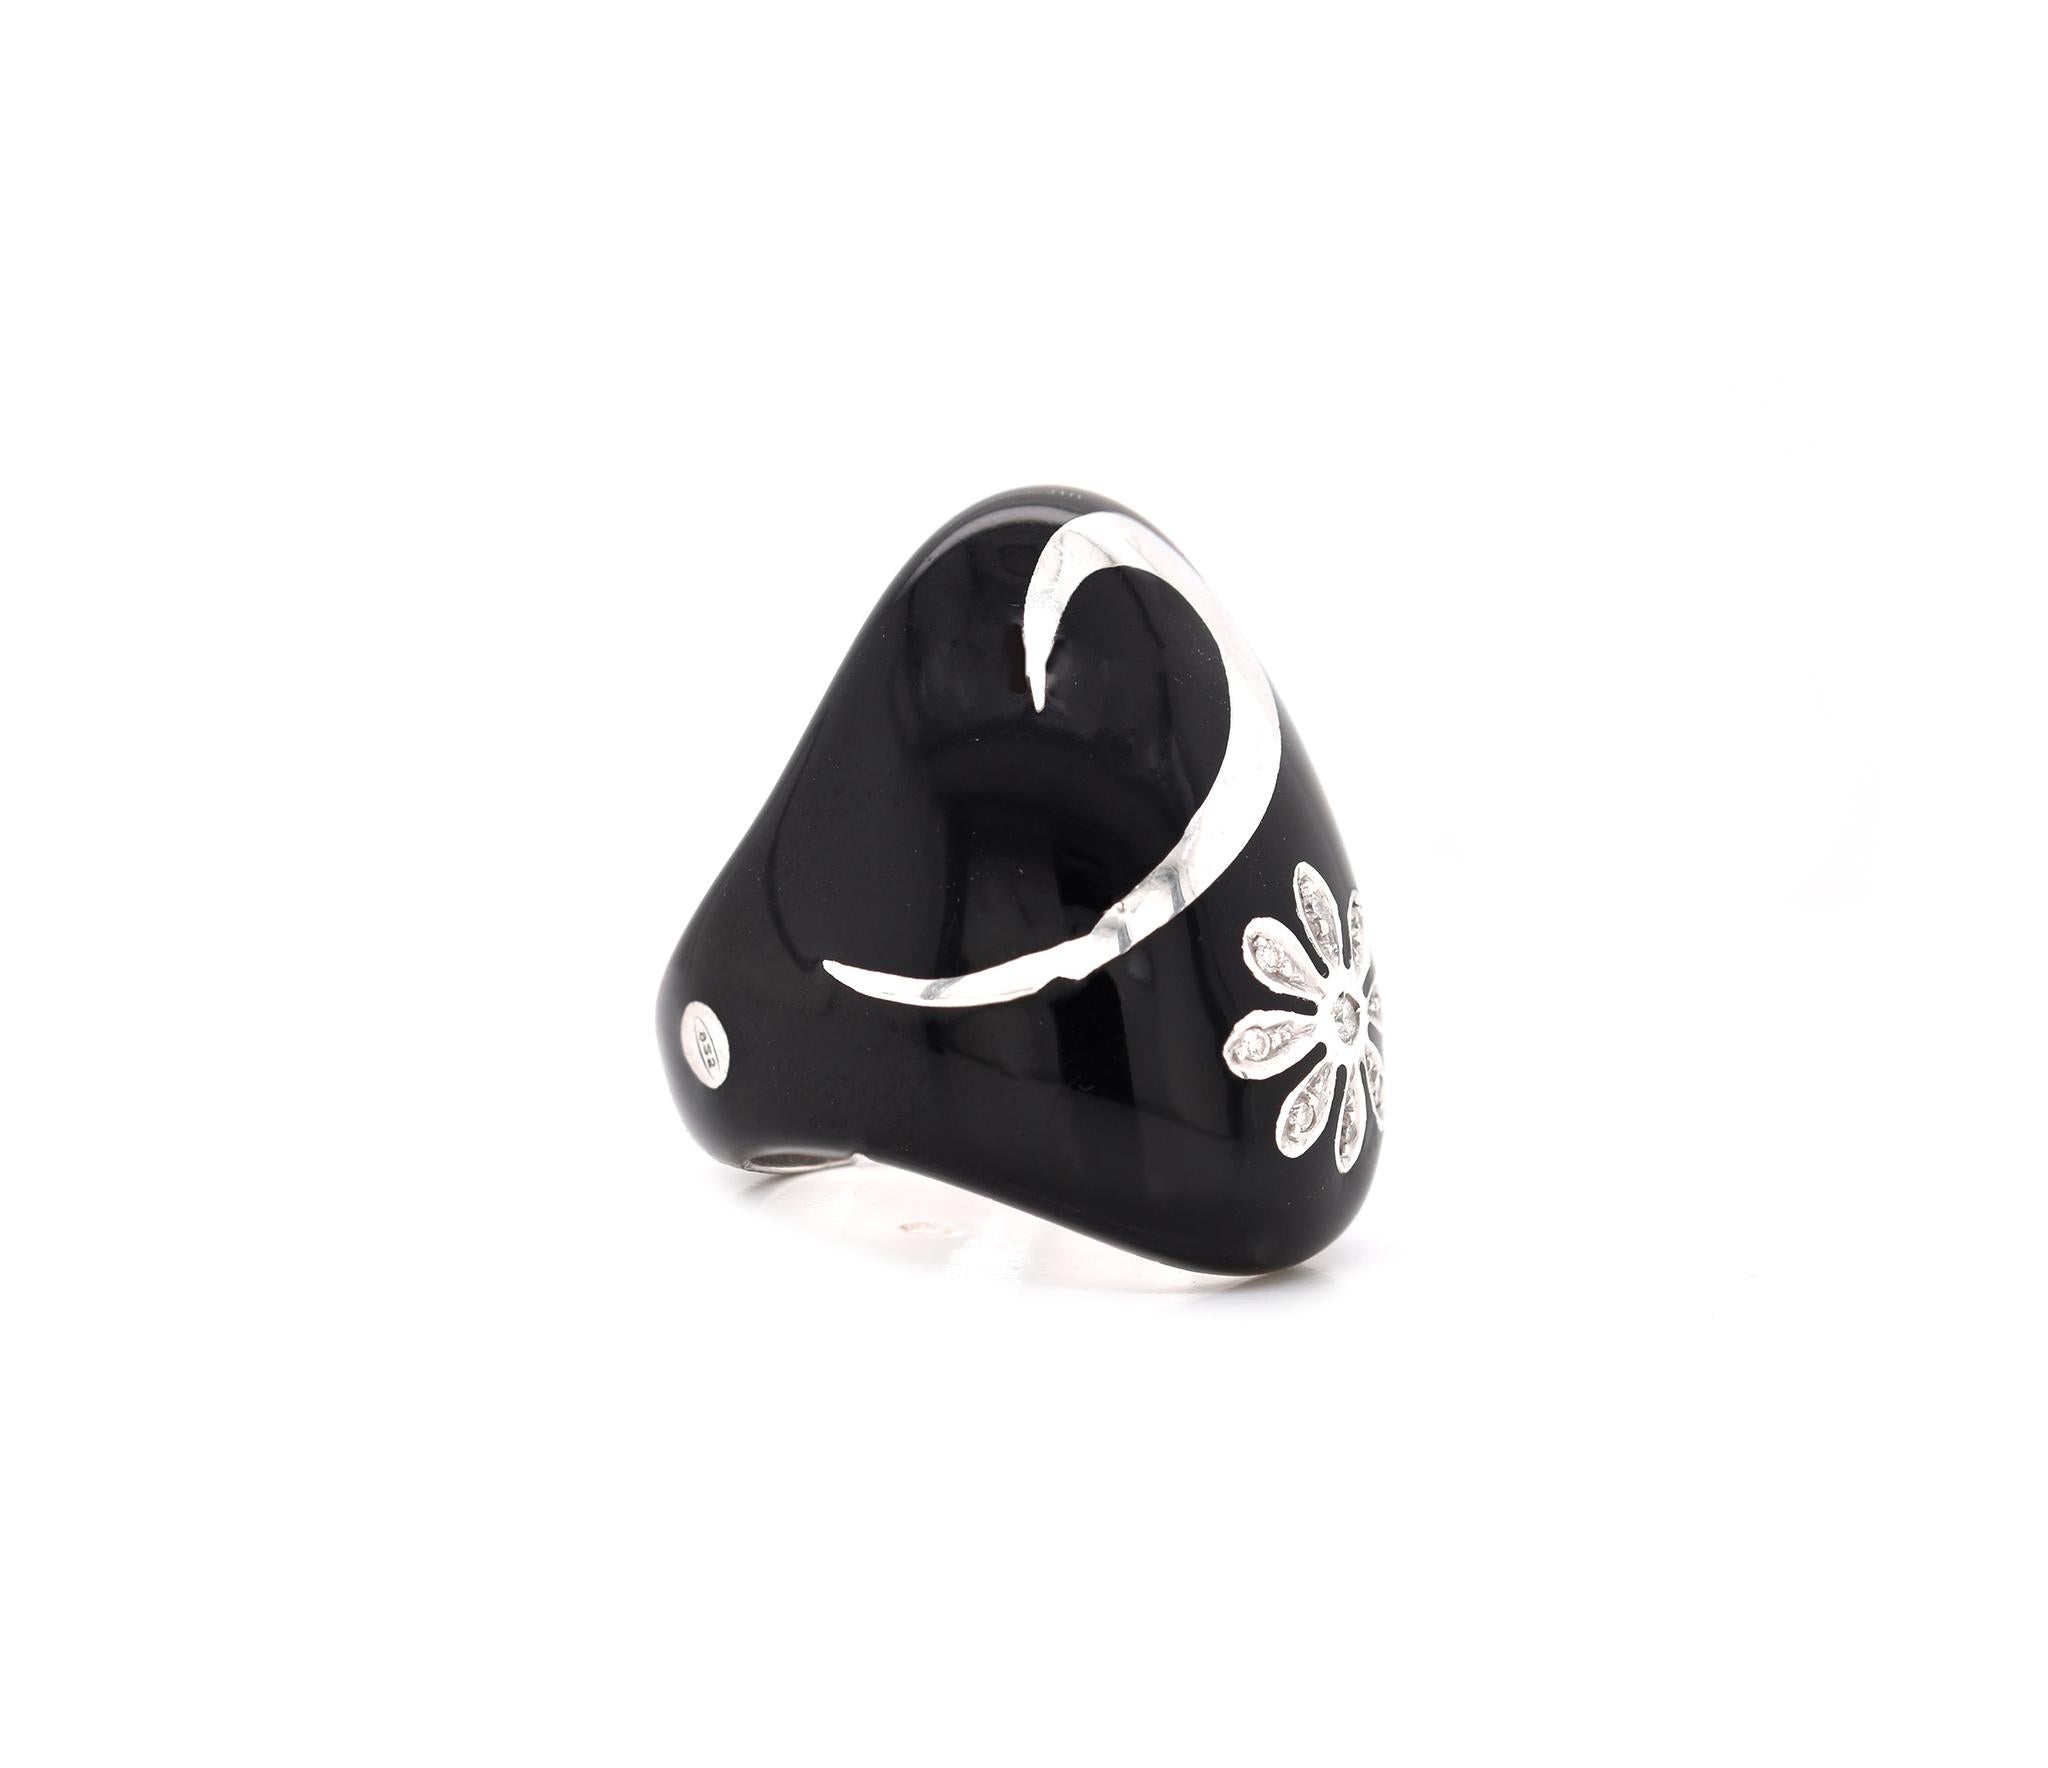 Designer: Alessadro Fanfani
Material: 18K white gold & black enamel
Diamond: 10 round brilliant cut = .10cttw
Color: G
Clarity: VS
Size: 7
Dimensions: ring measures 29mm wide
Weight: 19.96 grams
